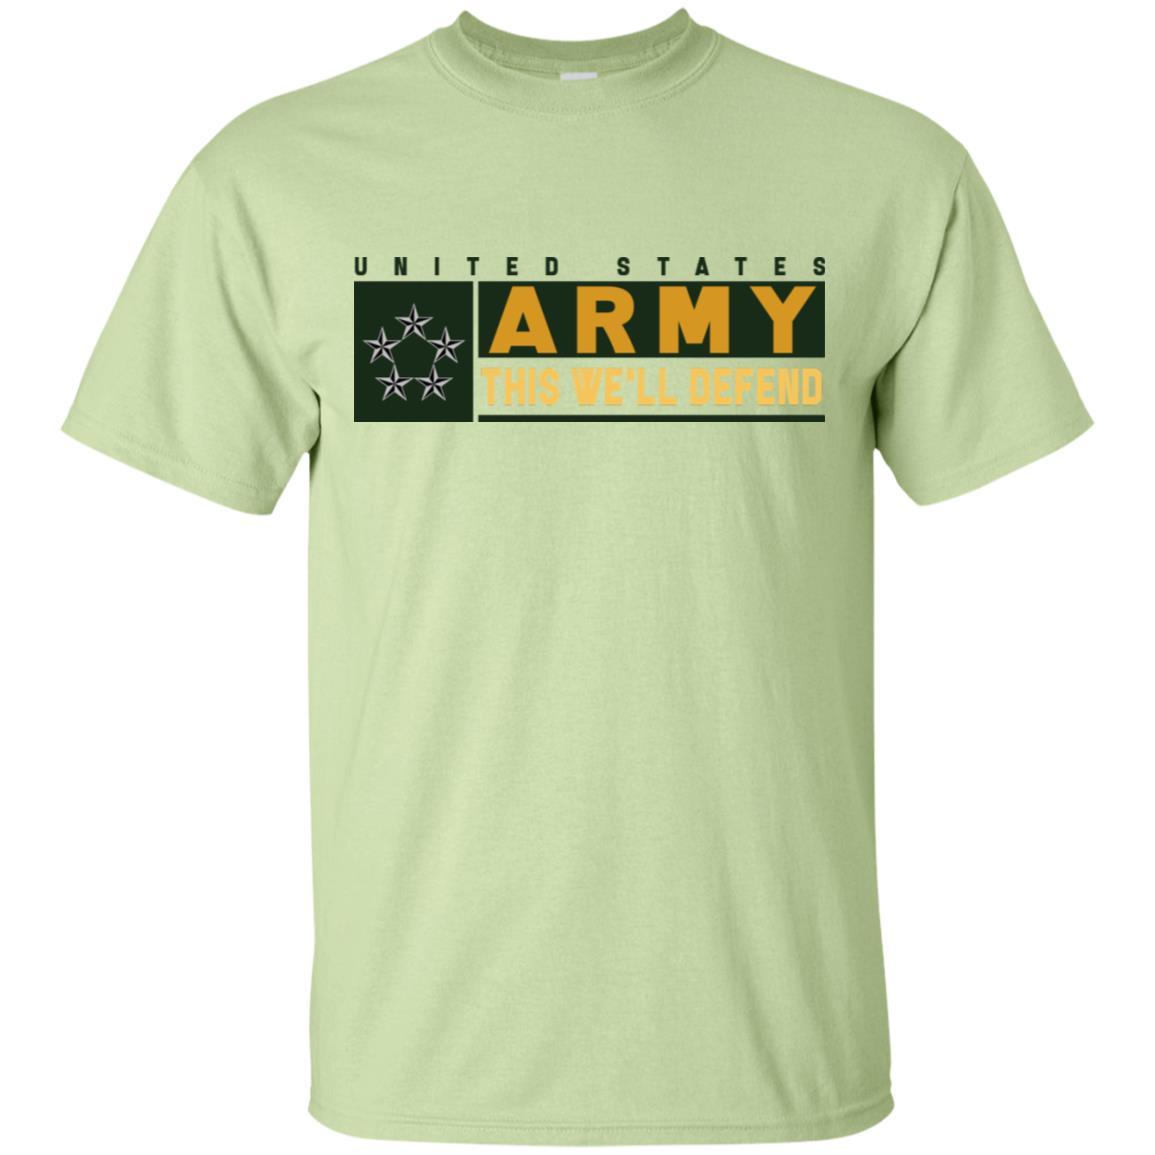 US Army O-10 GA This We Will Defend T-Shirt On Front For Men-TShirt-Army-Veterans Nation